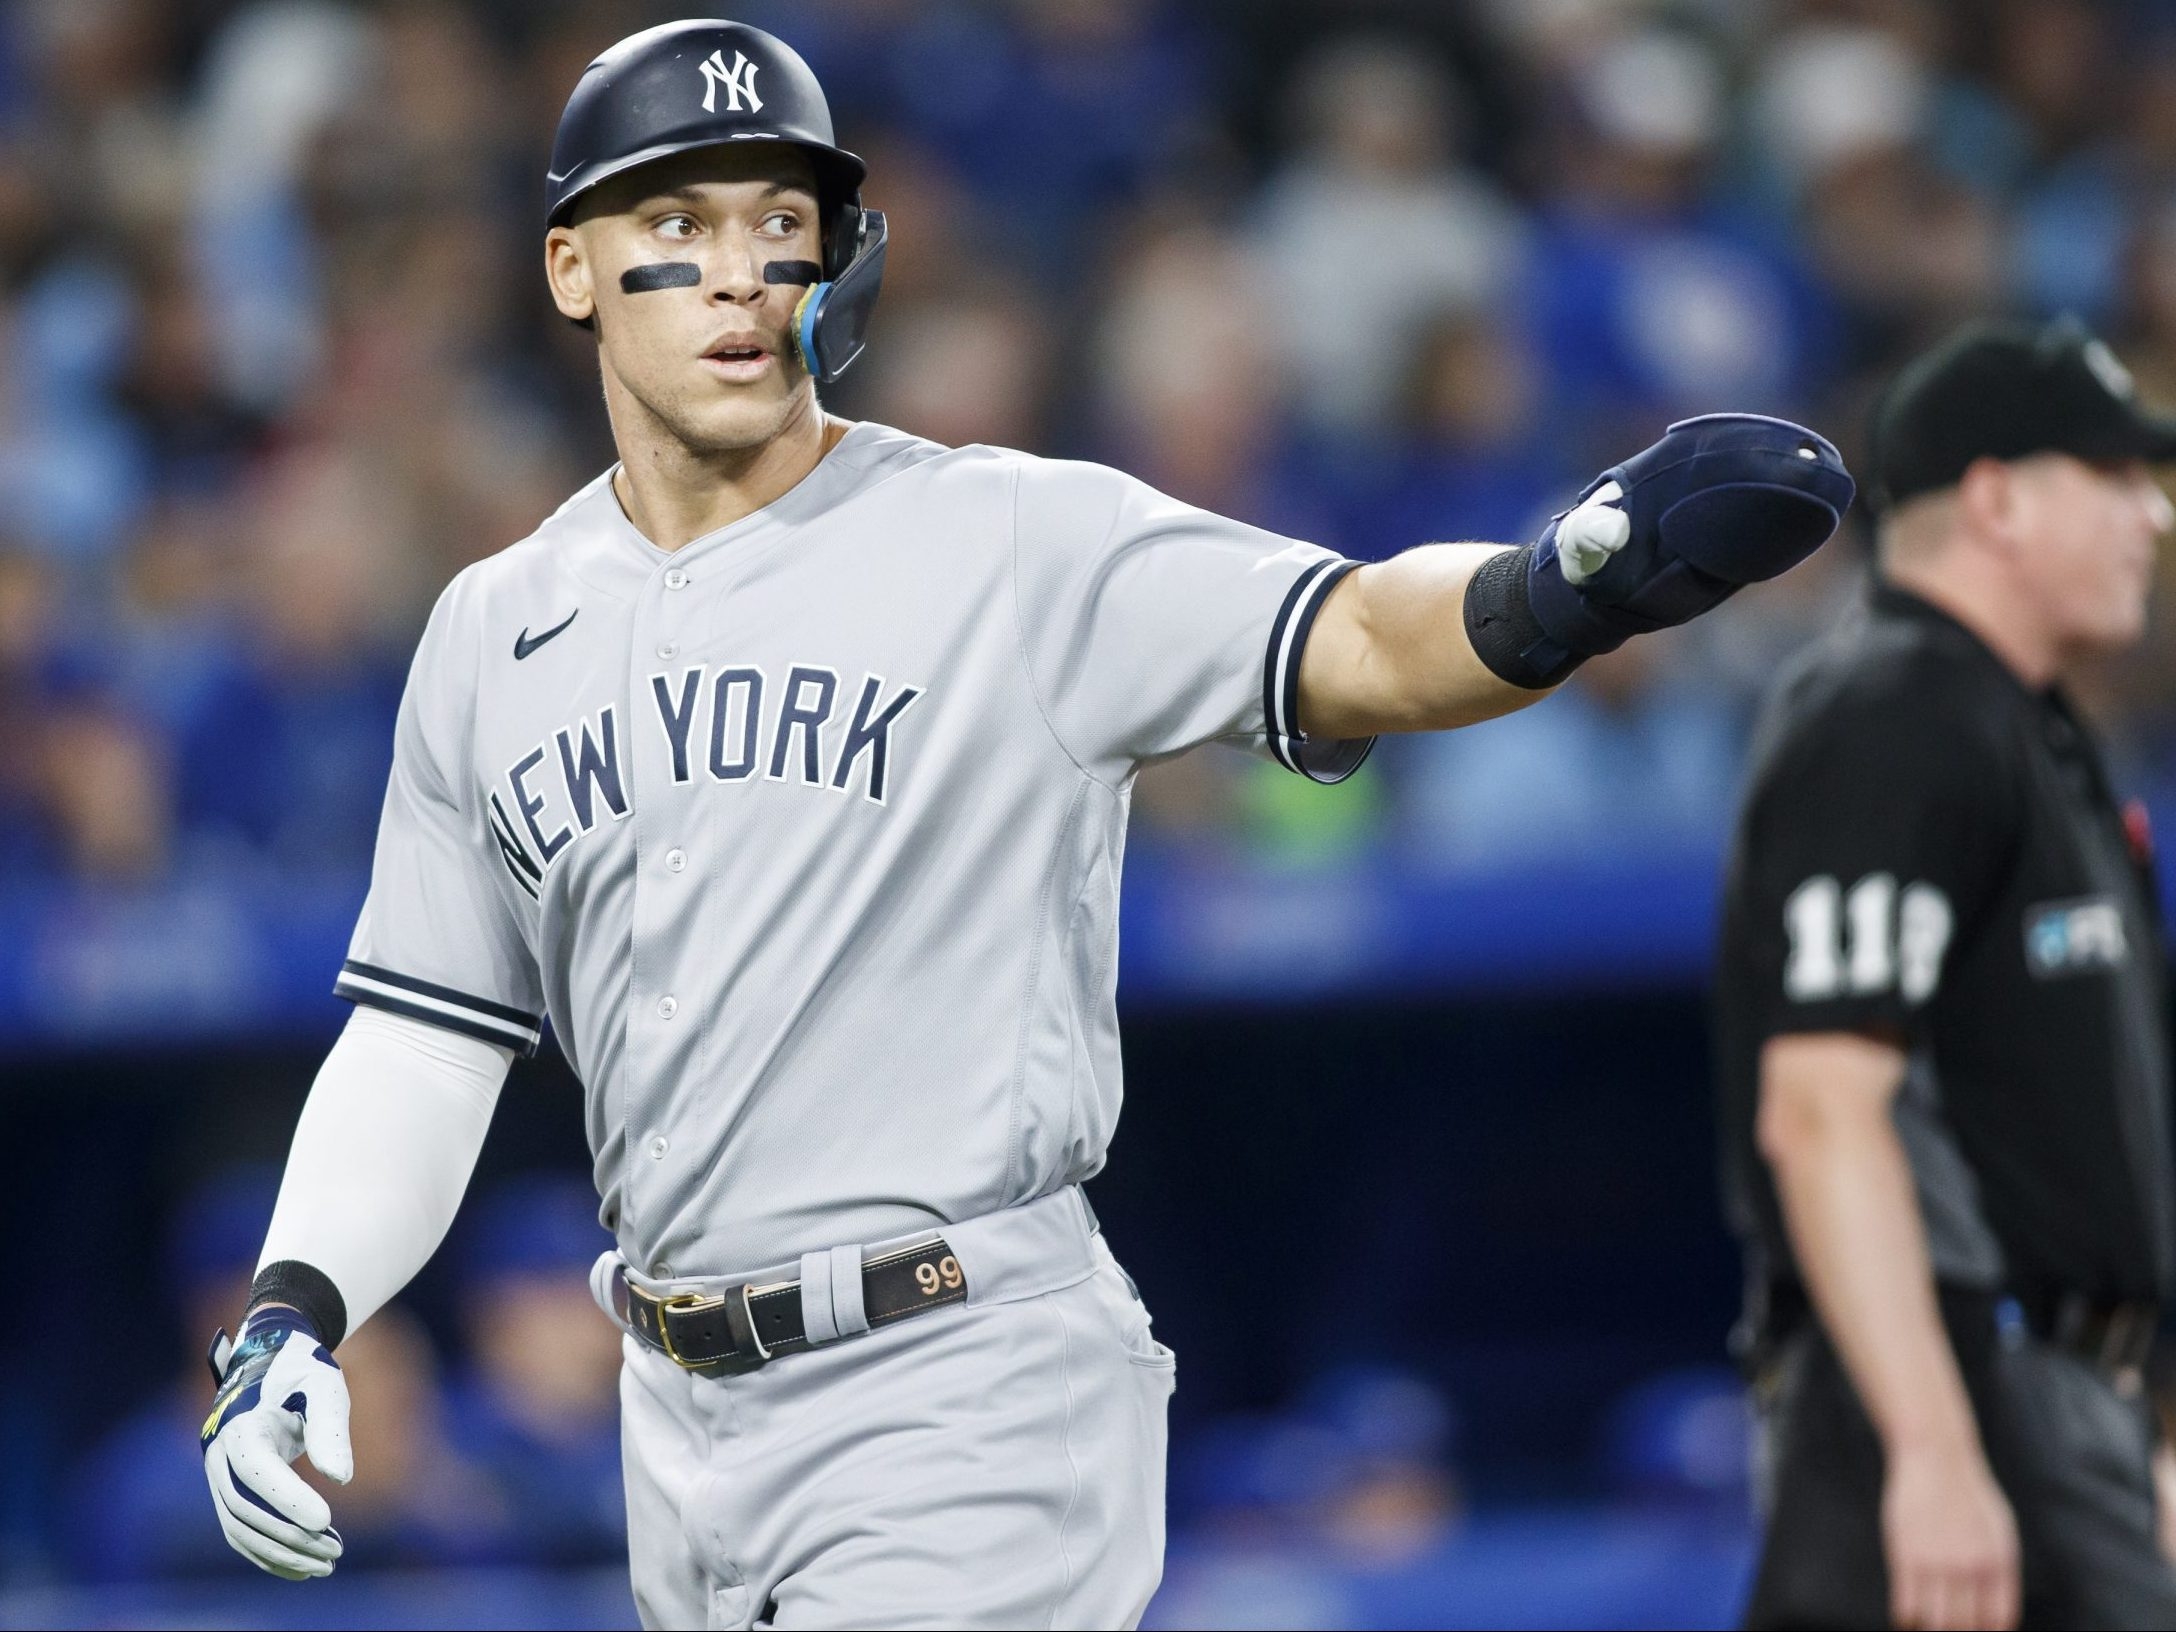 Aaron Judge's greatness is more than just a home run record